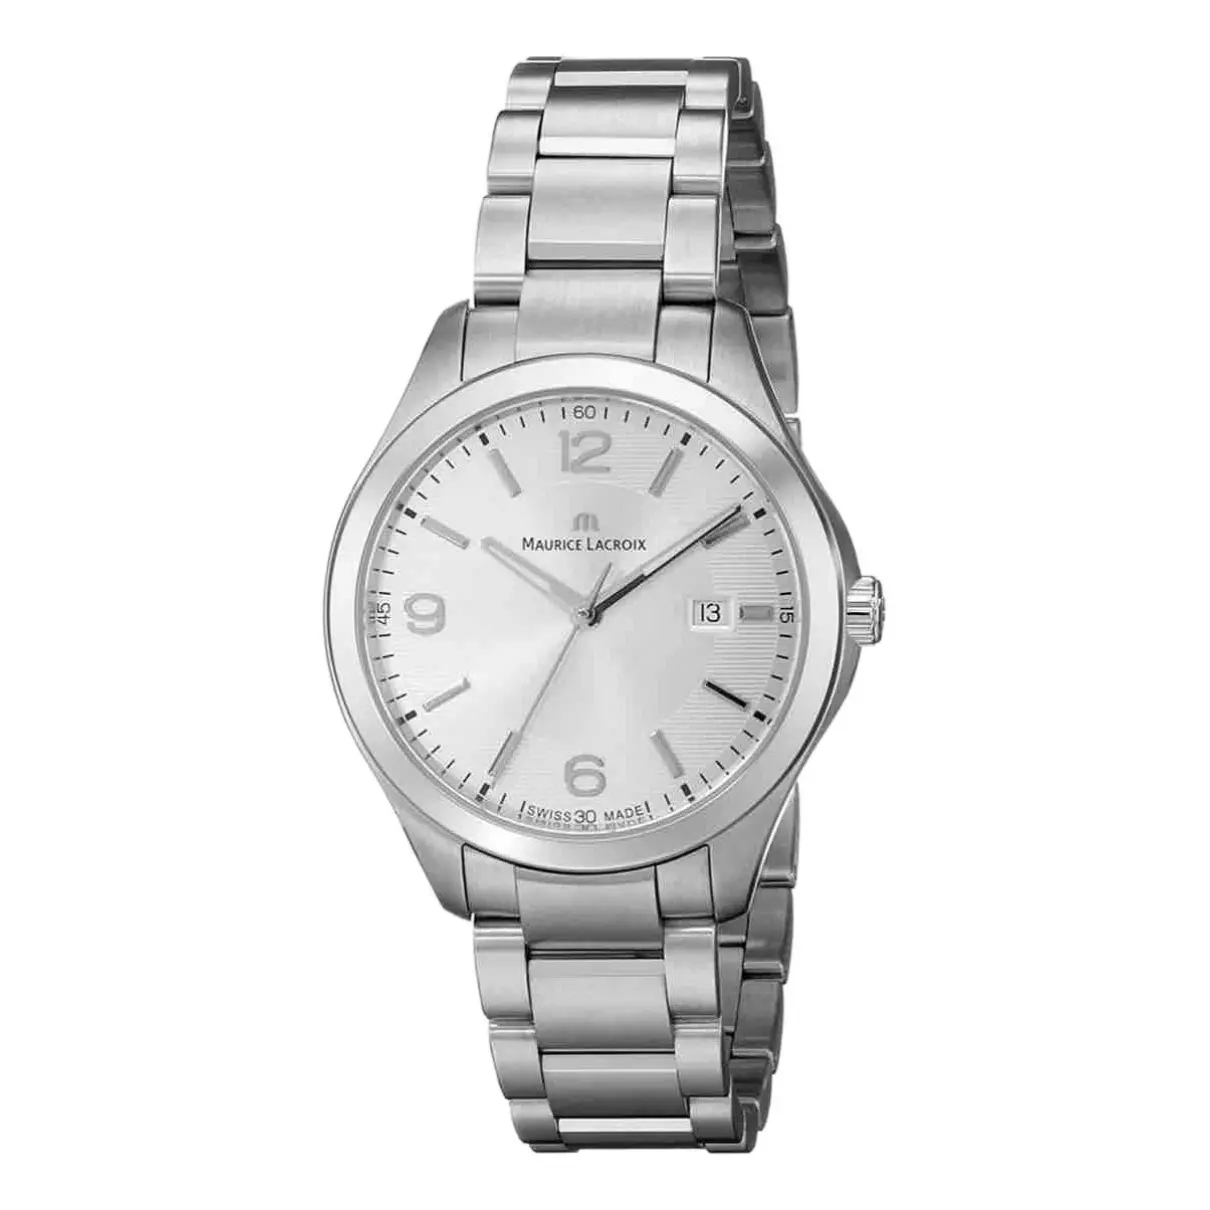 Buy Maurice Lacroix Watch online